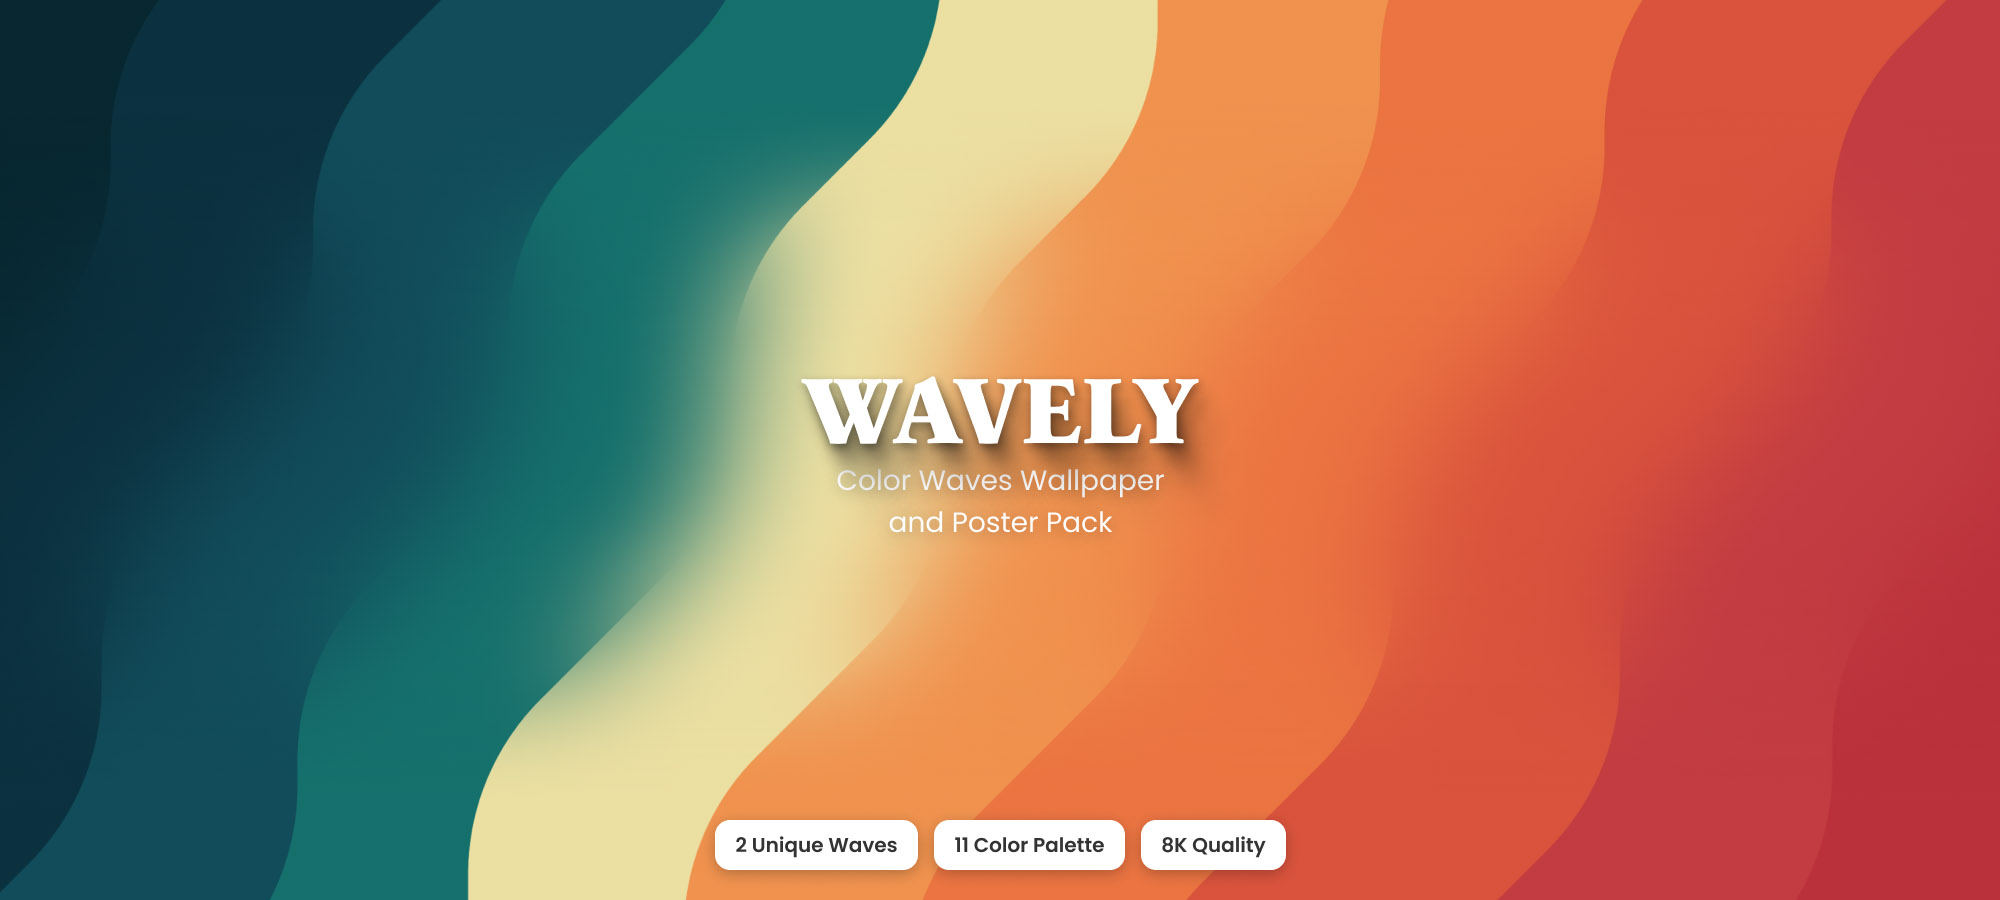 colorful wave posters and wallpapers to brighten your workspace